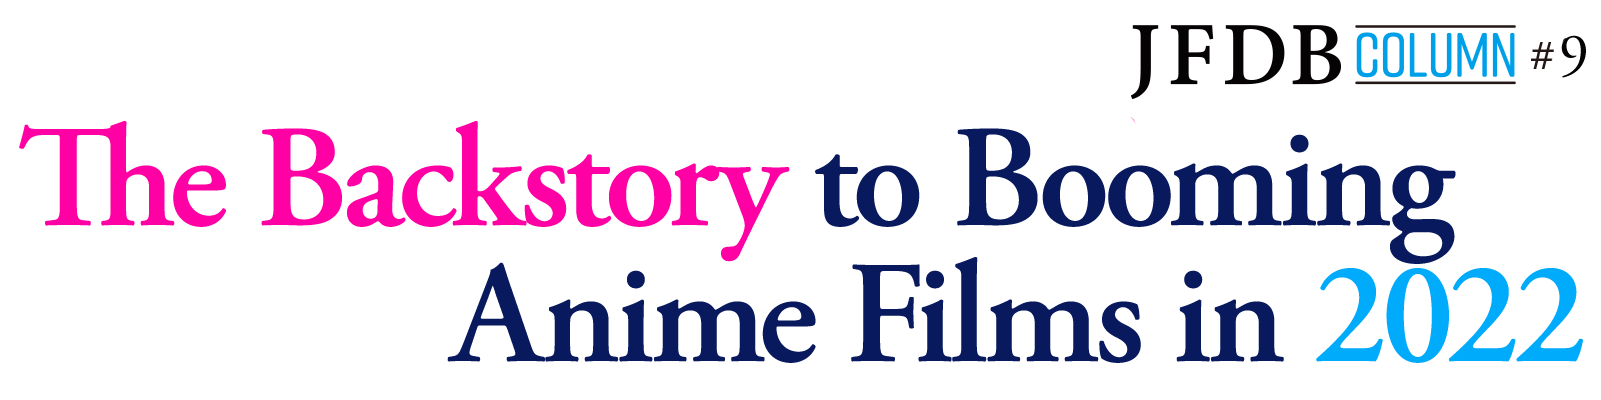 The Backstory to Booming Anime Films in 2022 - JFDB Column #09